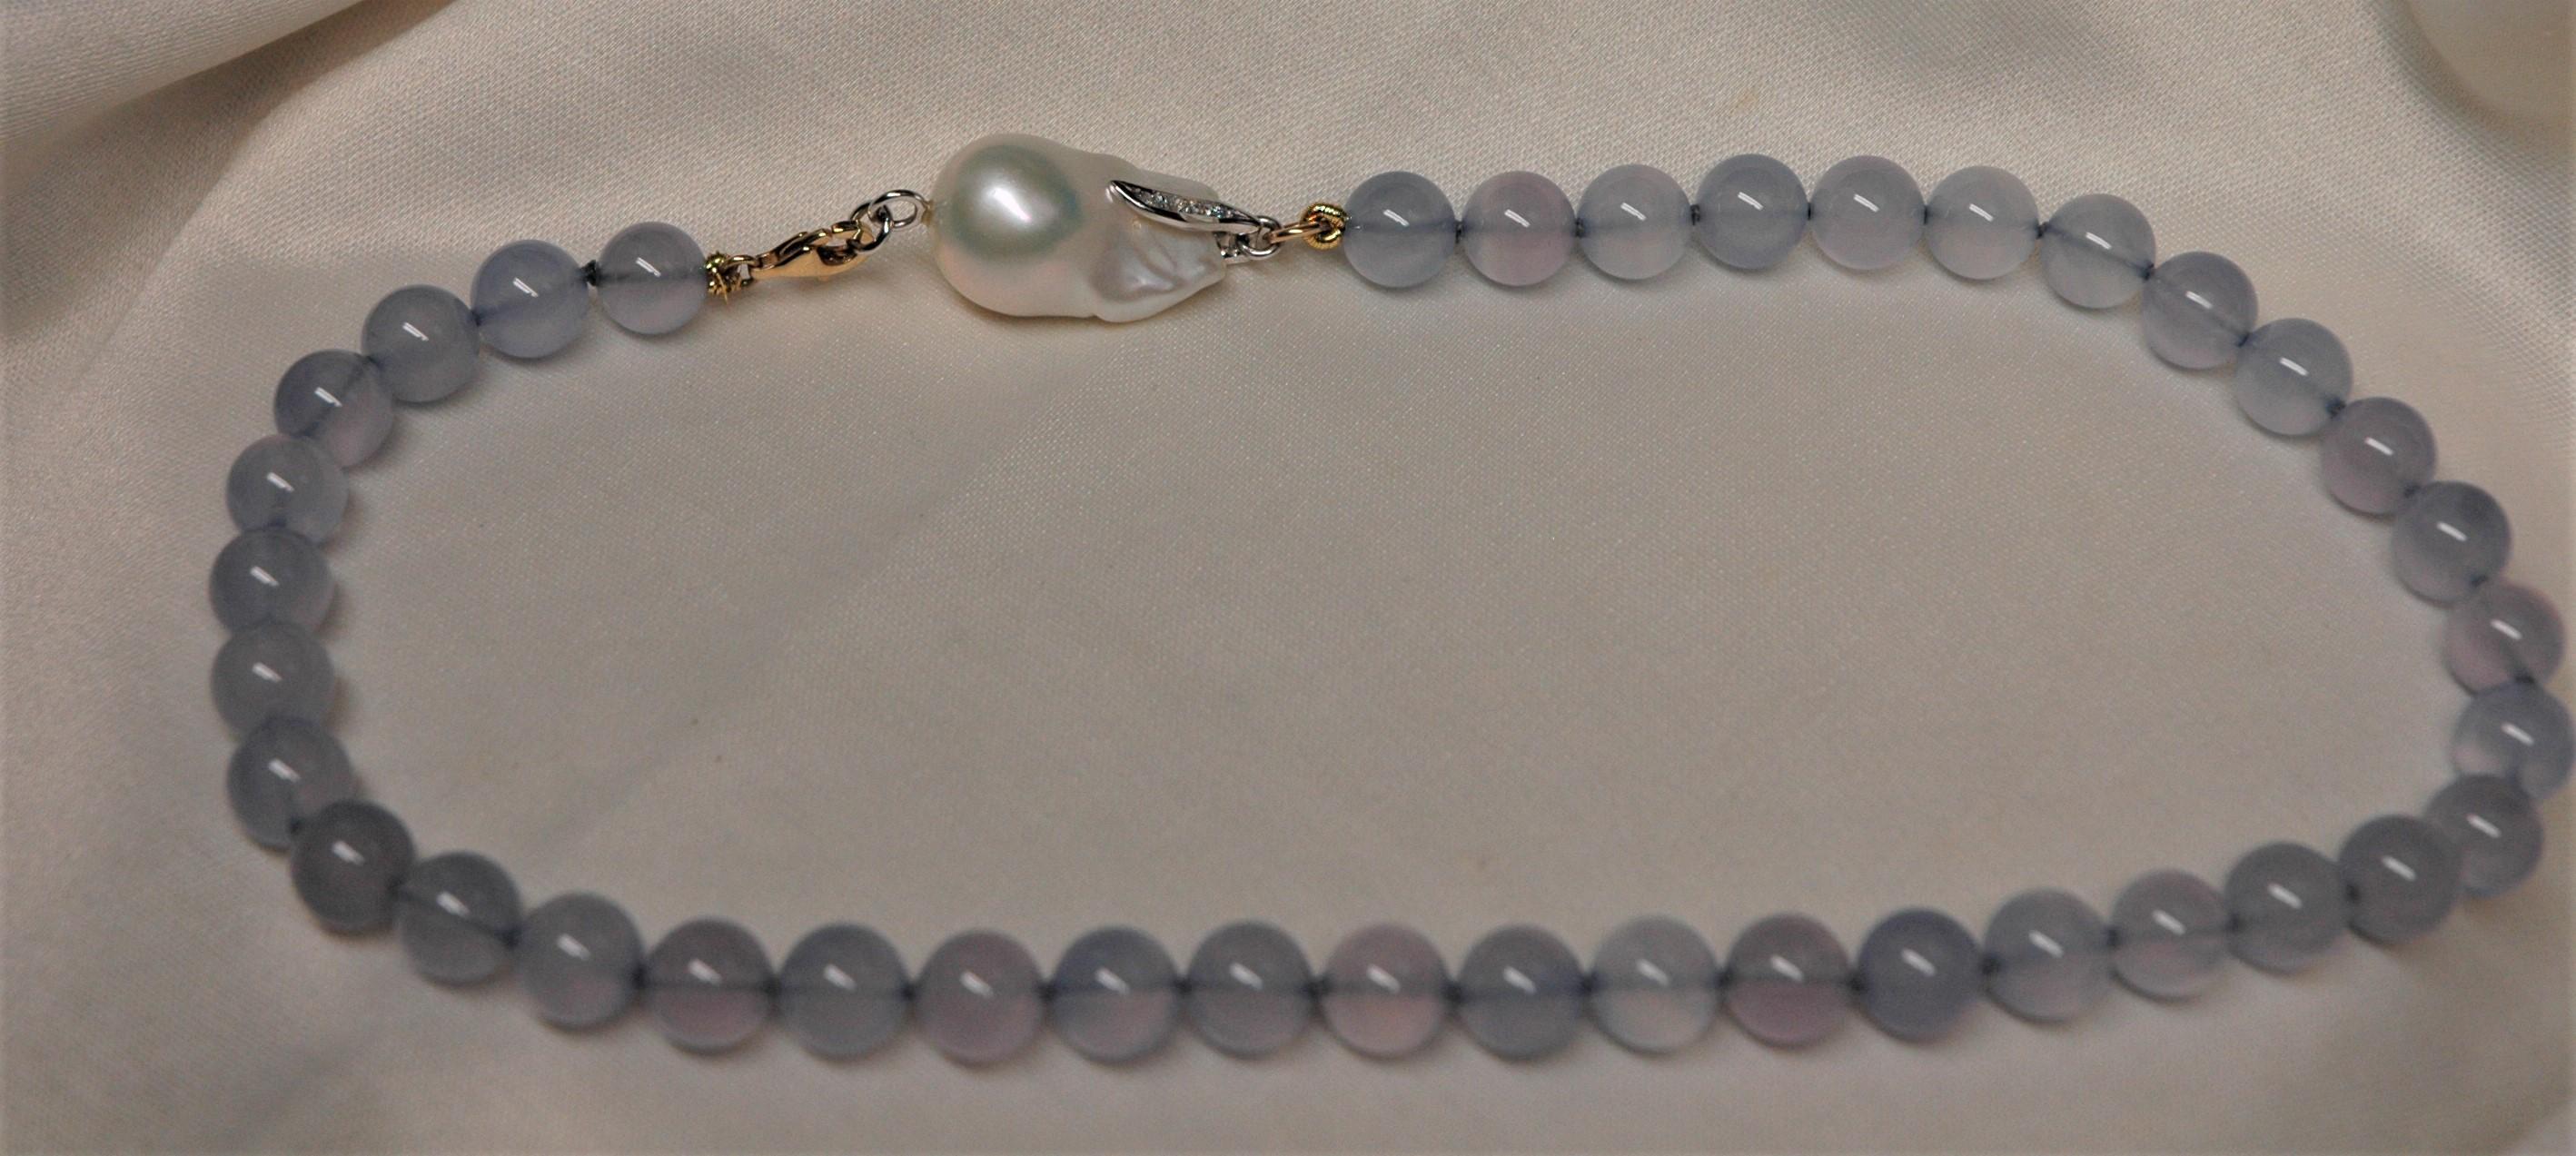 Very nice chalcedony collier with a single Australian pearl and a white gold leaf detail with diamonds (ct.0.06).
Every chalcedony sphere measures 10mm in diameter, while the Australian pearl is irregular and it has an elongated shape. The necklace